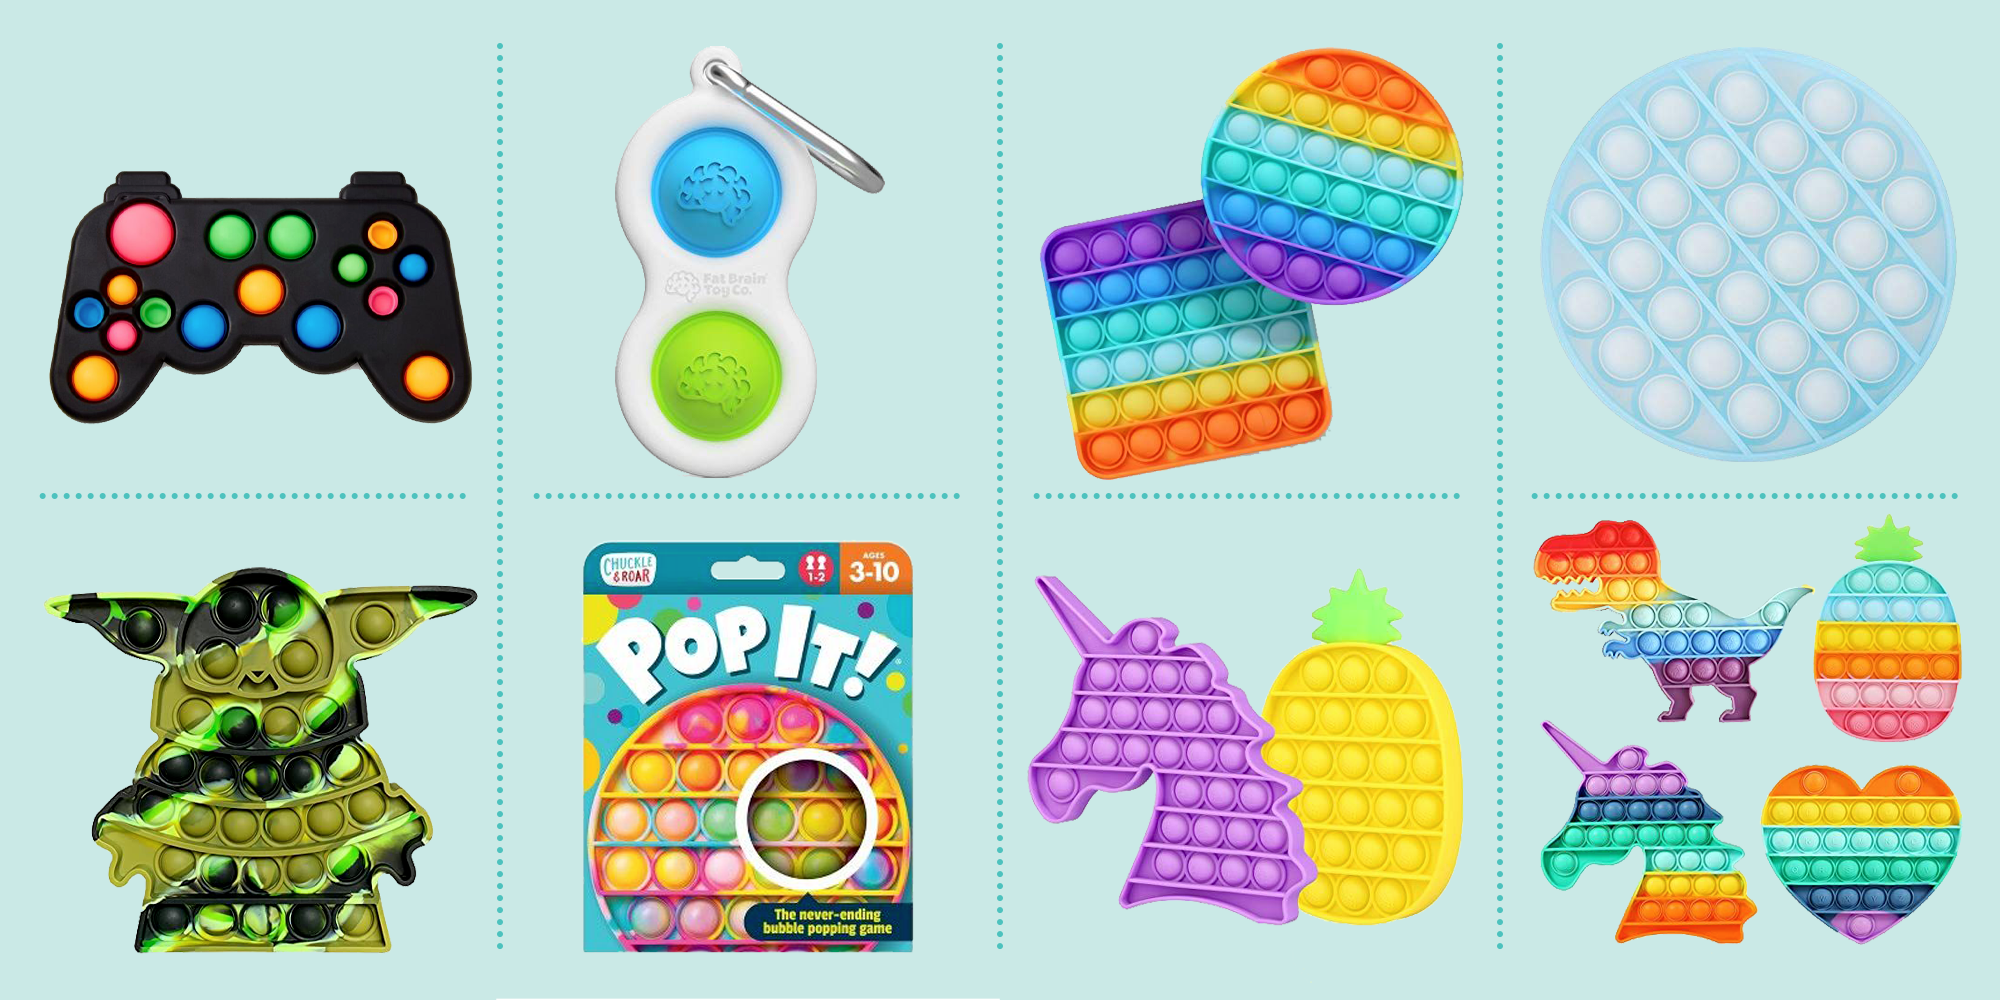 Popping Sound Fidget Toys 3 Pack Rainbow Bubble Sensory Fidget Toys ADHD Anxiety & Stress Relief Items Gifts Autism Learning Materials Toys Pack Set for Toddlers Boys Girls Kids Teens 